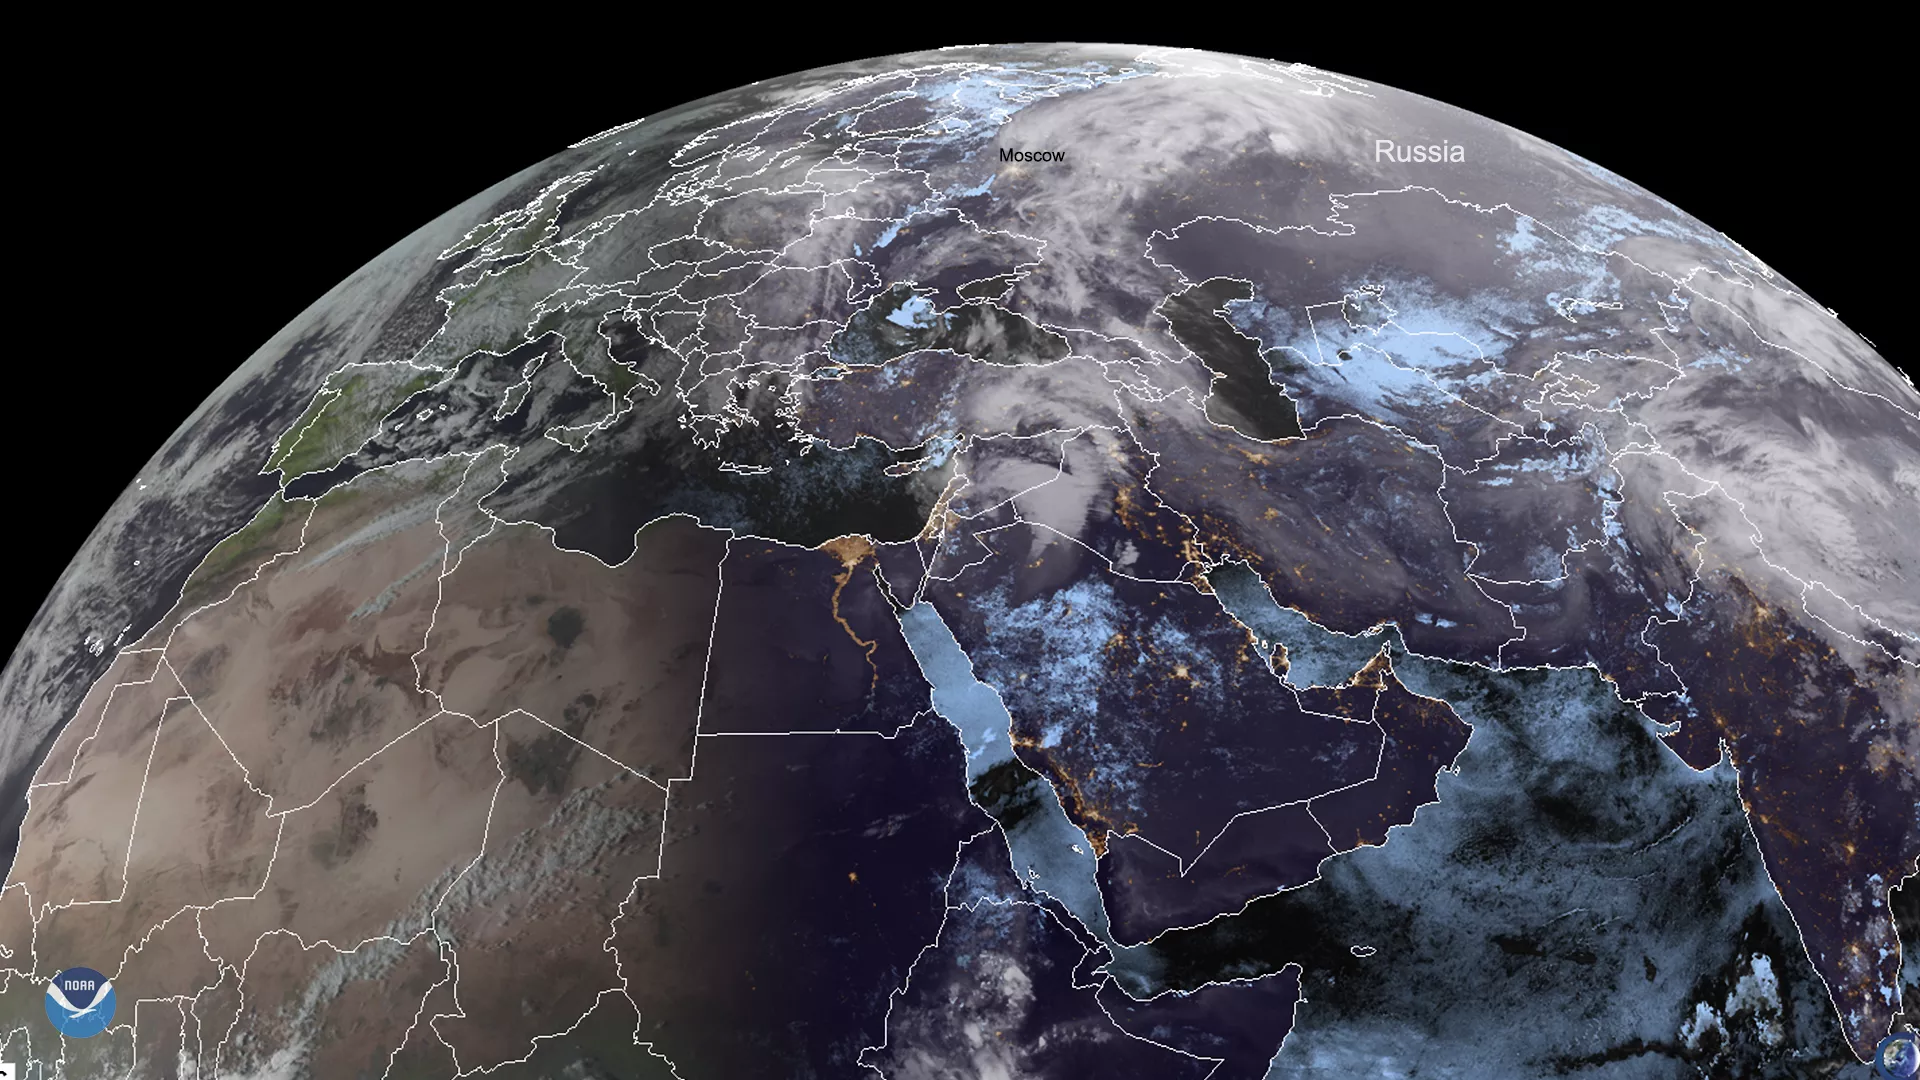 On March 6, 2020, the Meteosat-8 satellite viewed Moscow and the western half of Russia via Natural Color 